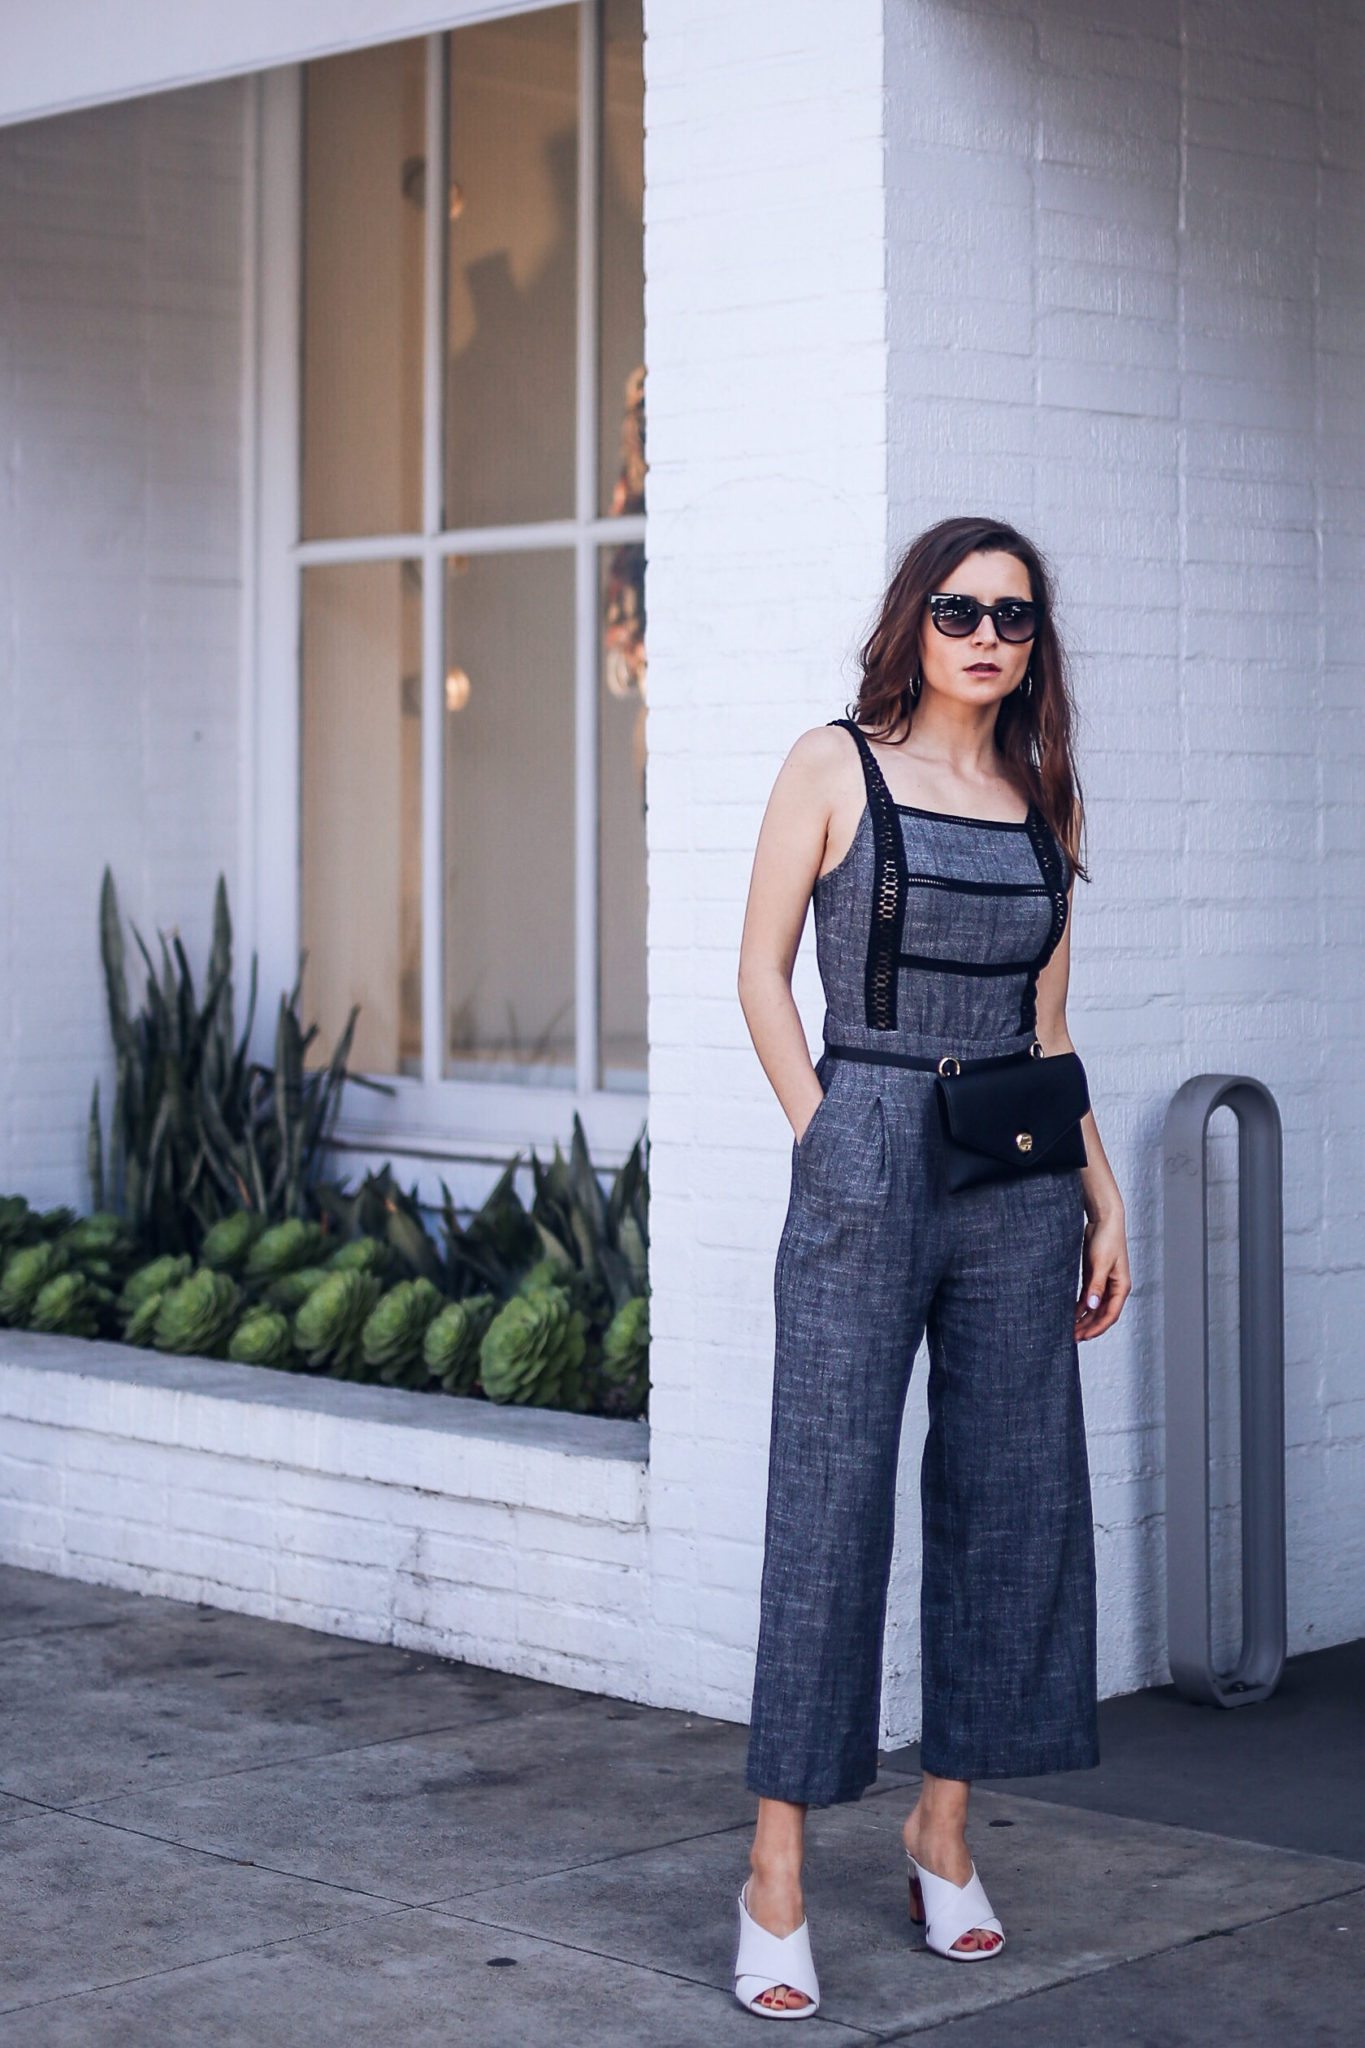 How to wear the belt bag: best belt bags, designer bum bags, fanny packs under $100 - Pin to read later on Houseofcomil.com. Jumpsuit by Moon River